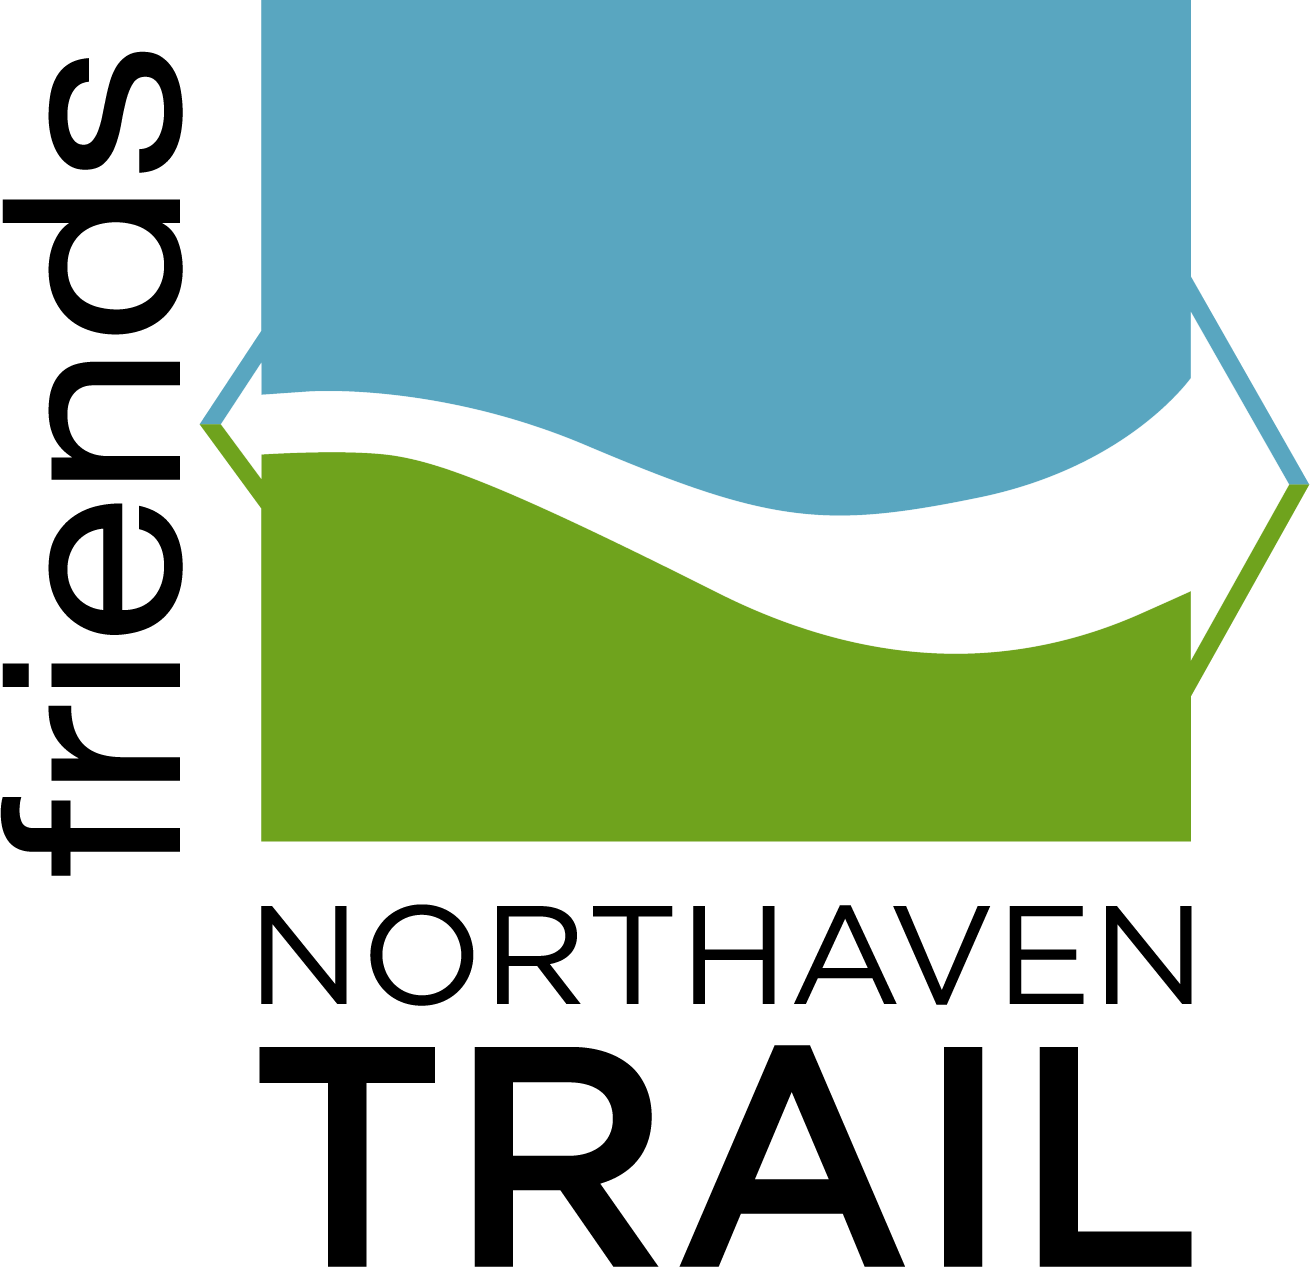 Friends of Northaven Trail